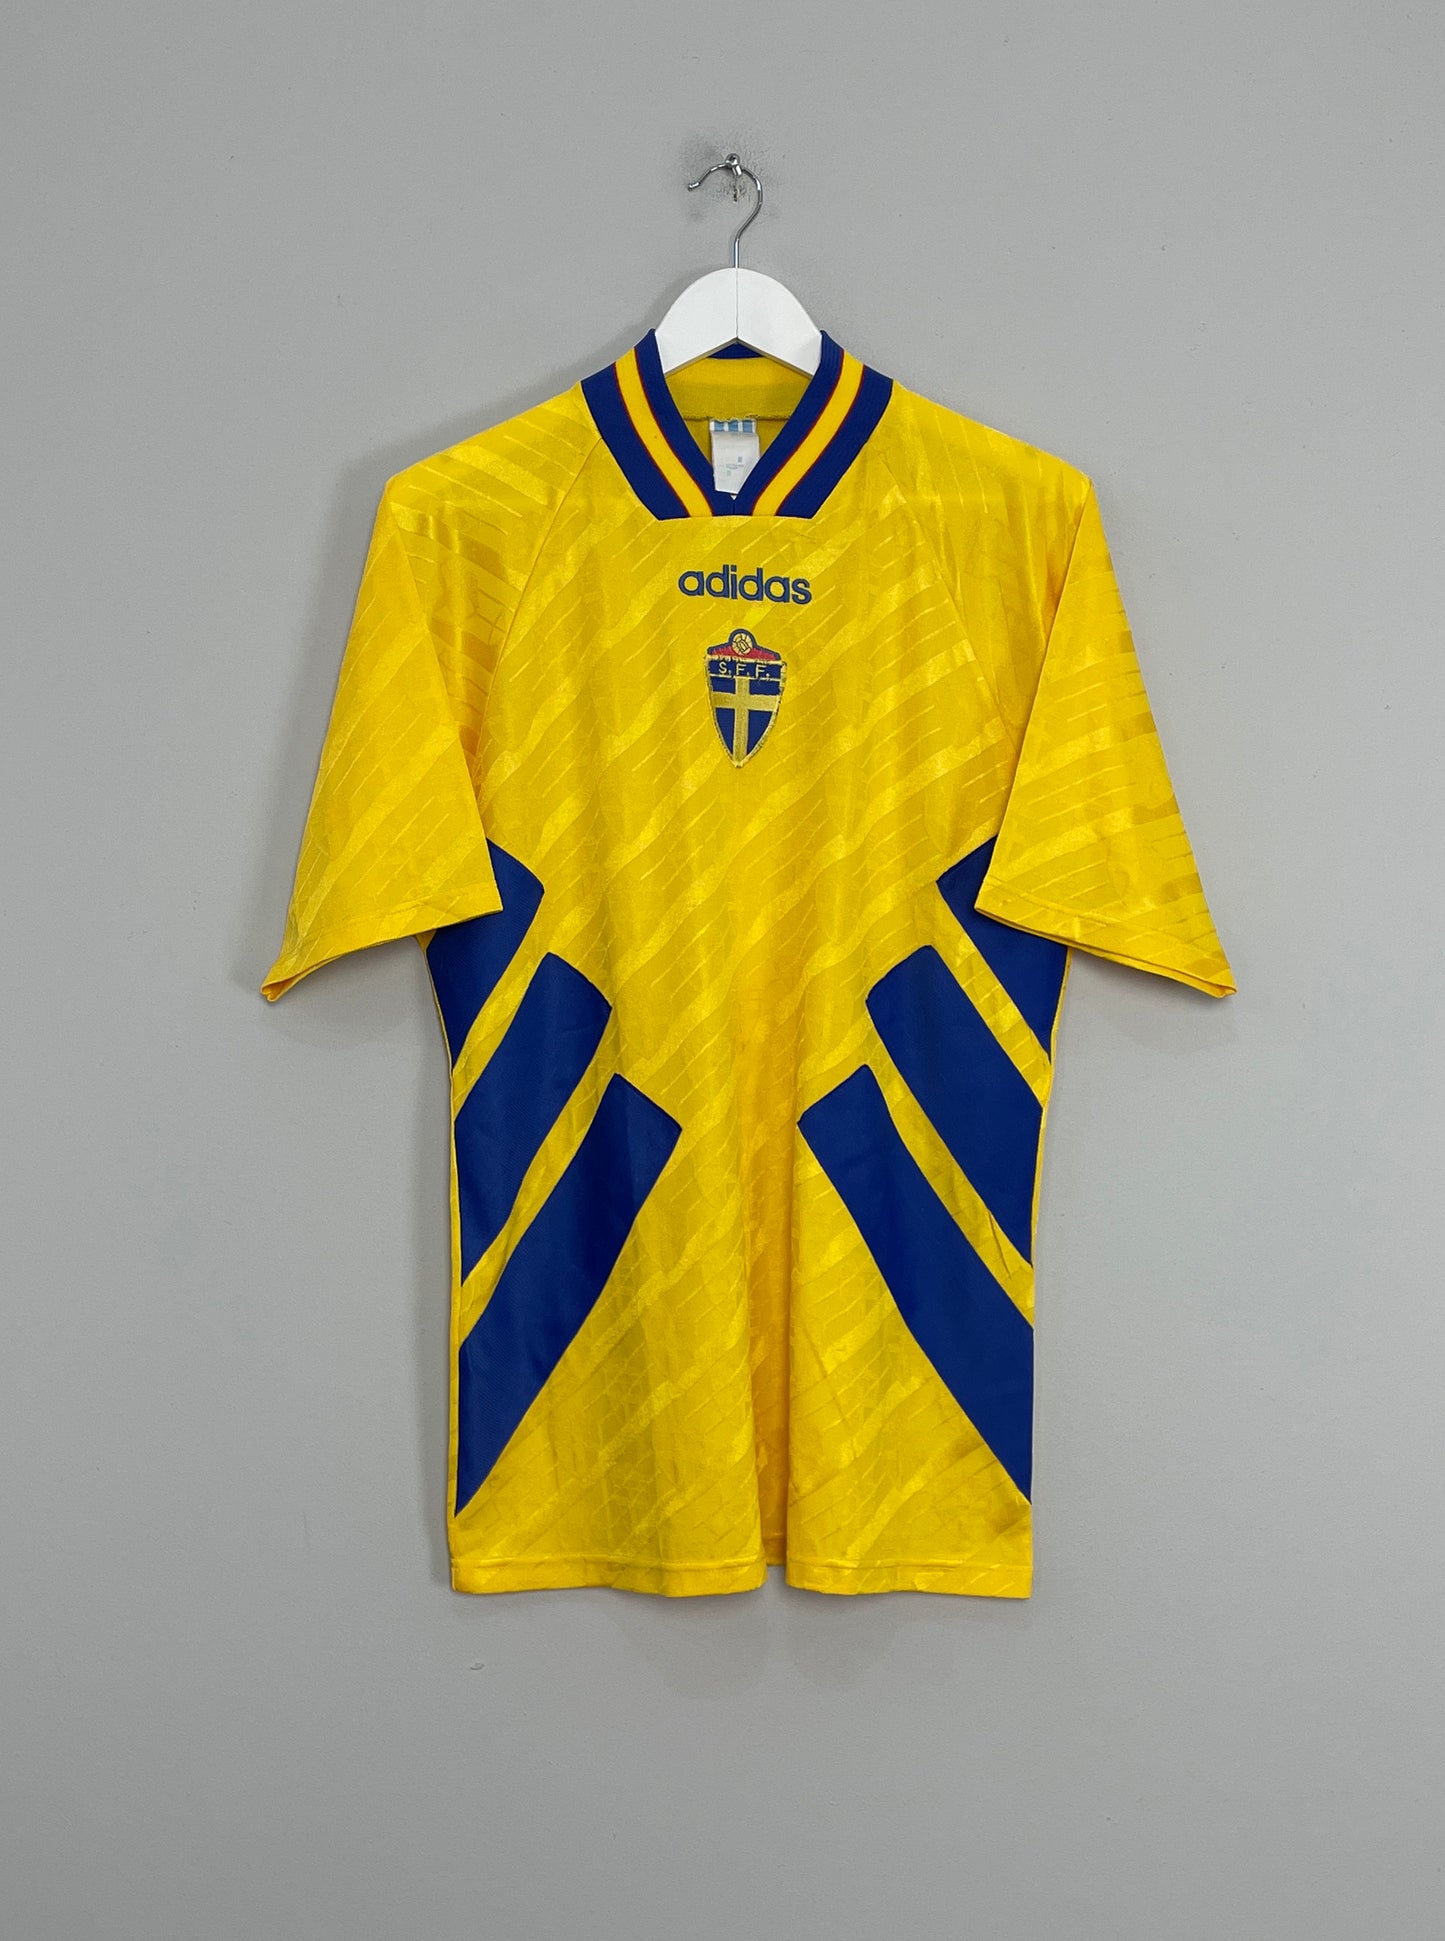 Image of the Sweden shirt from the 1994/95 season